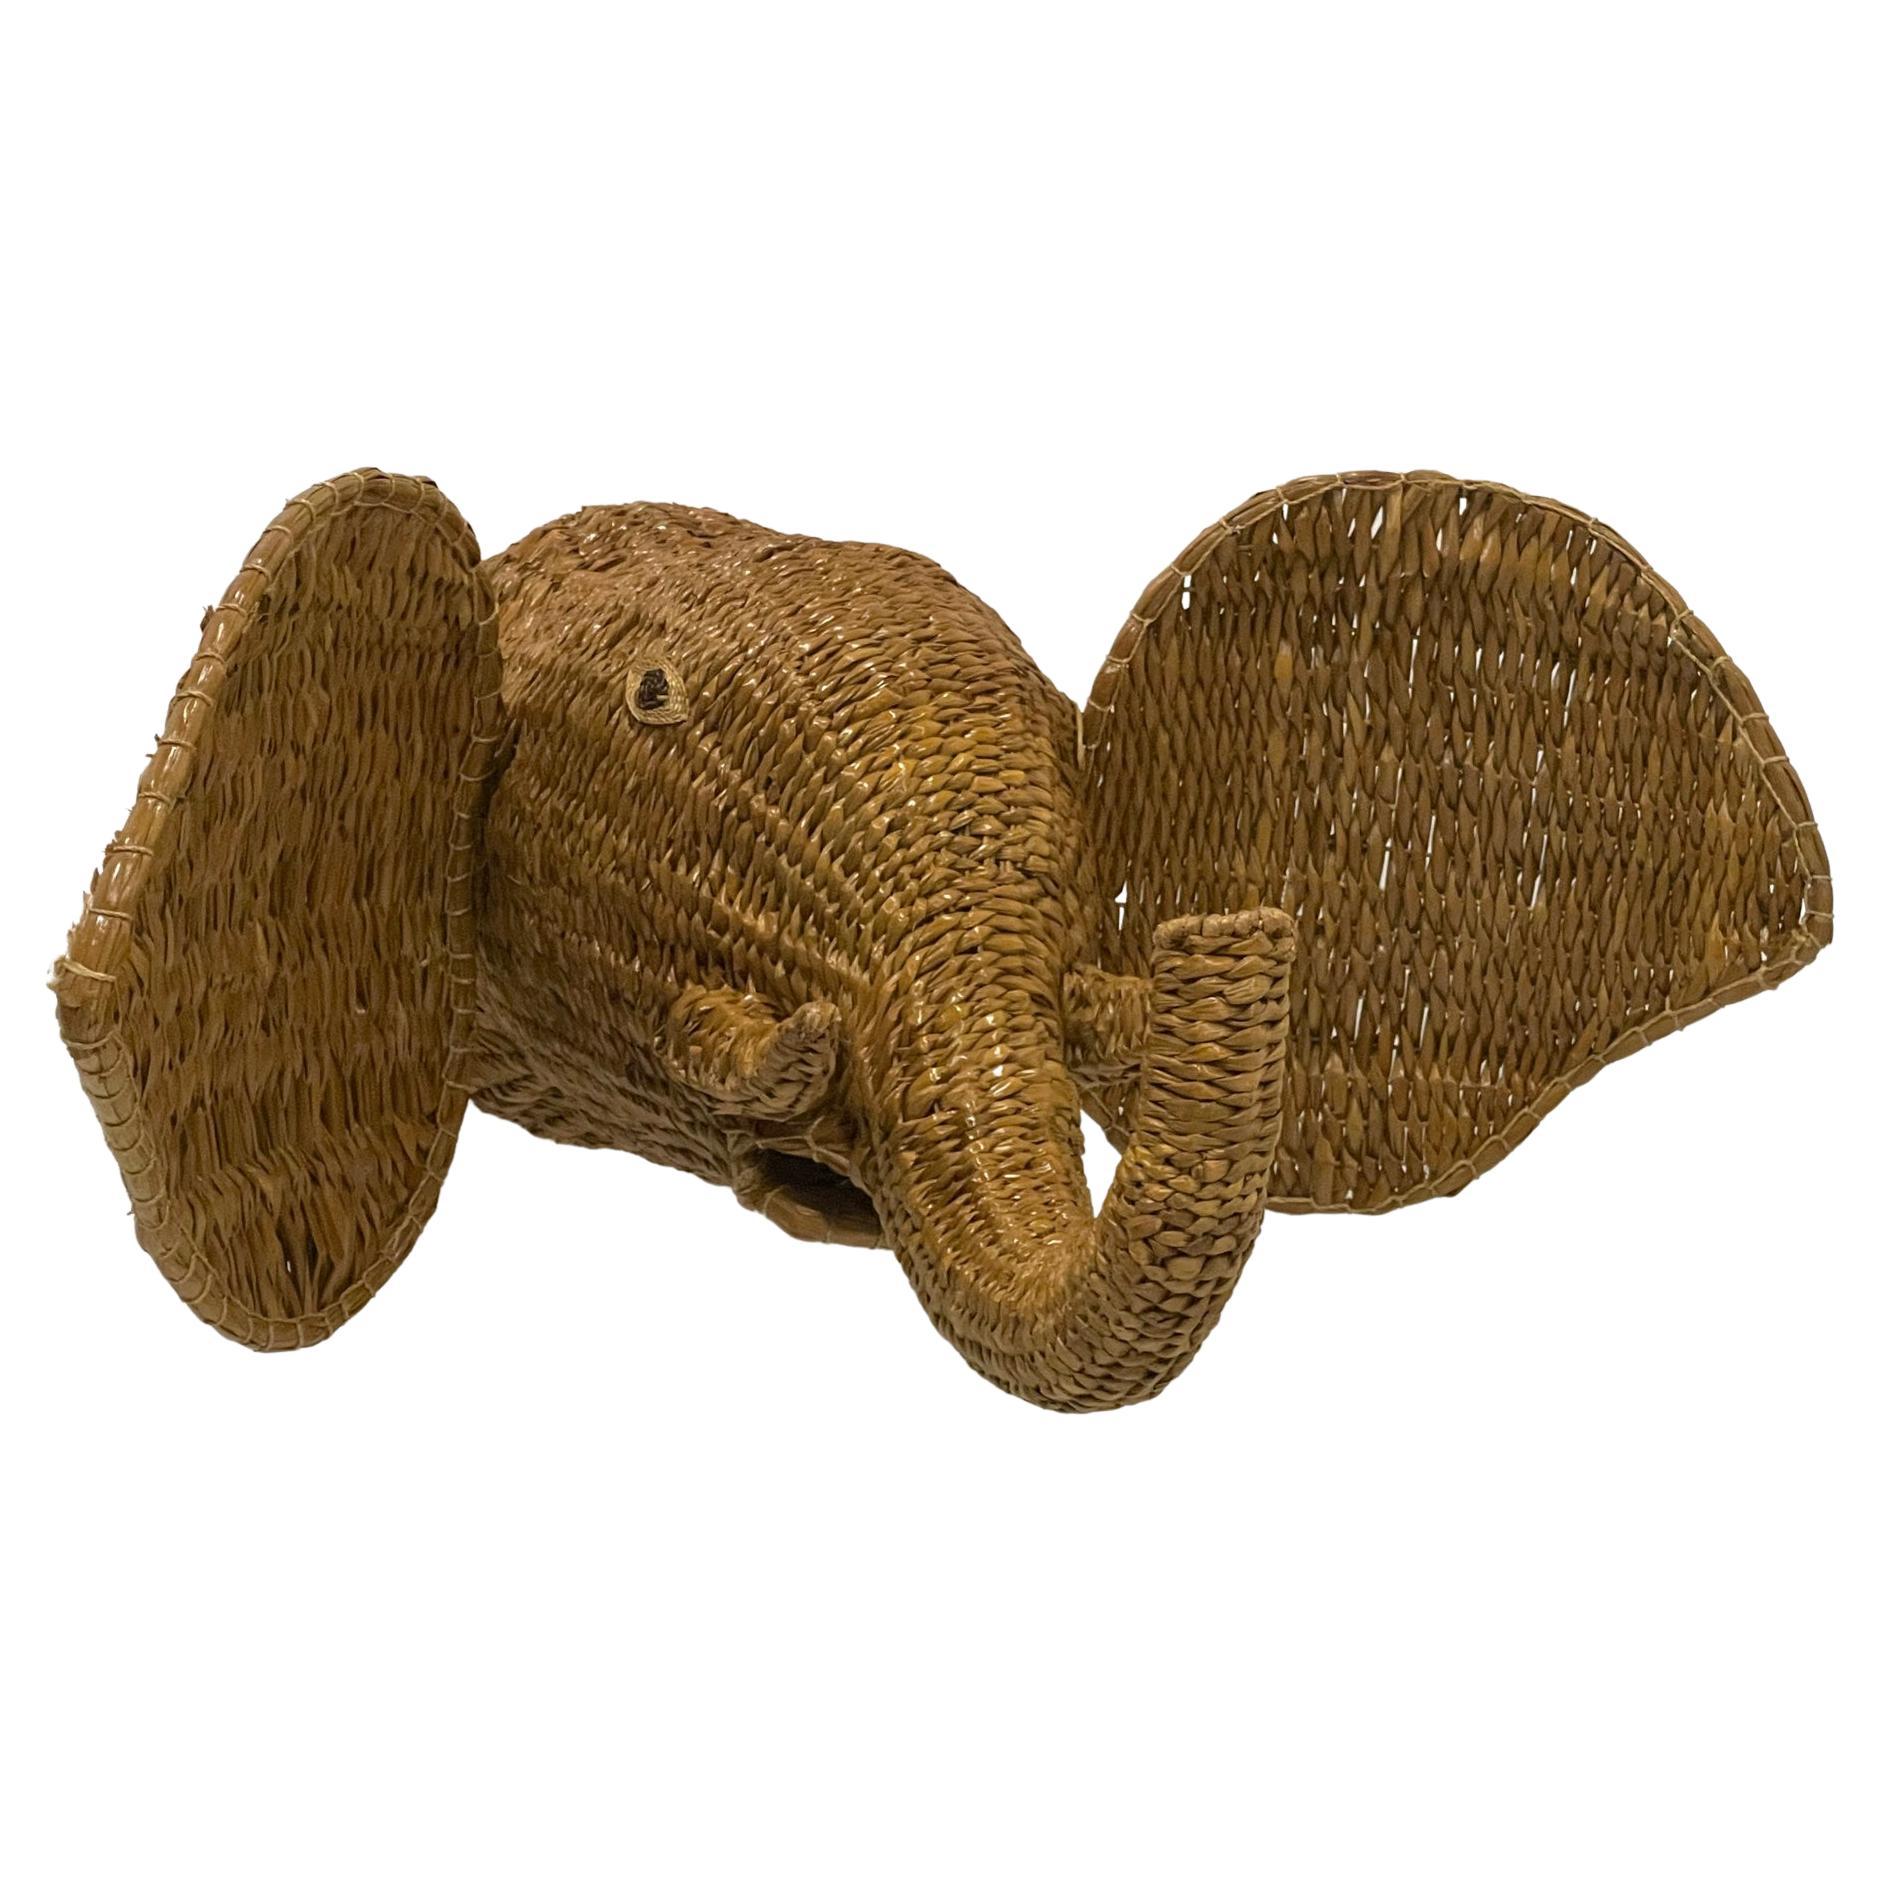 Monumental Surprising Water Hyacinth Elephant Trophy Head Wall Sculpture For Sale